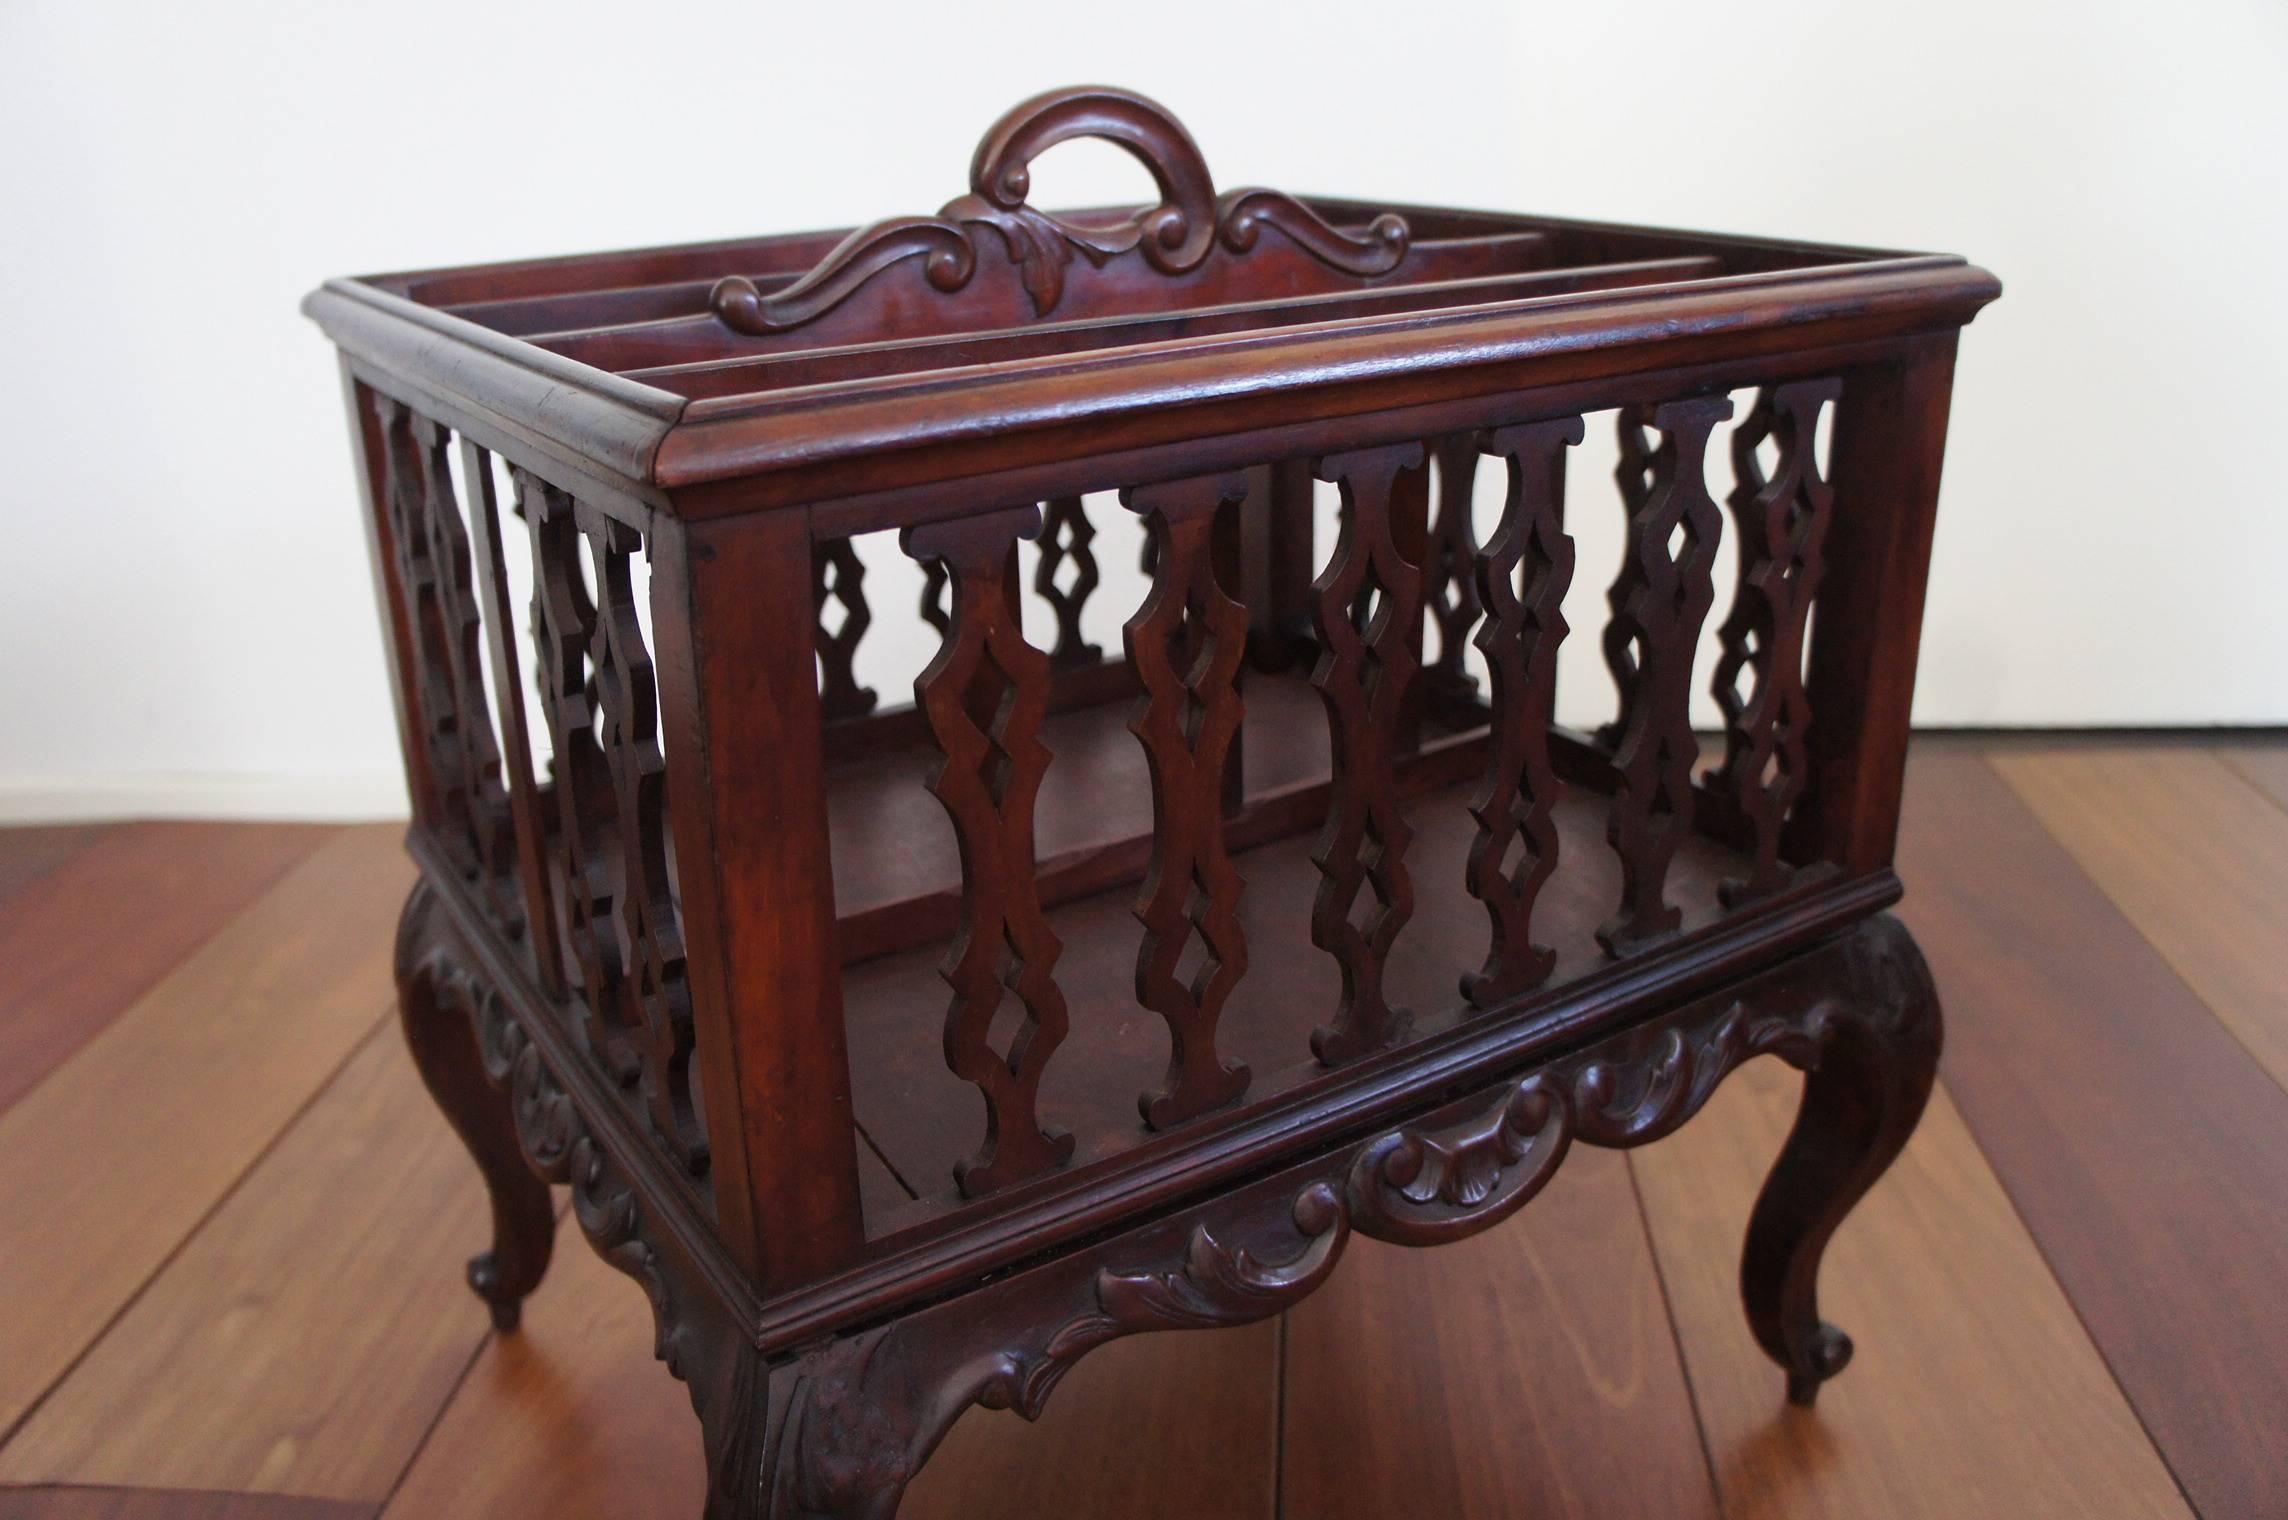 All handcrafted mahogany canterbury from England, circa 1880.

This beautifully shaped Canterbury is real eyecatcher and very practical in everyday life. The elegant, integrated handle on top also makes it easy to move around. This magazine rack